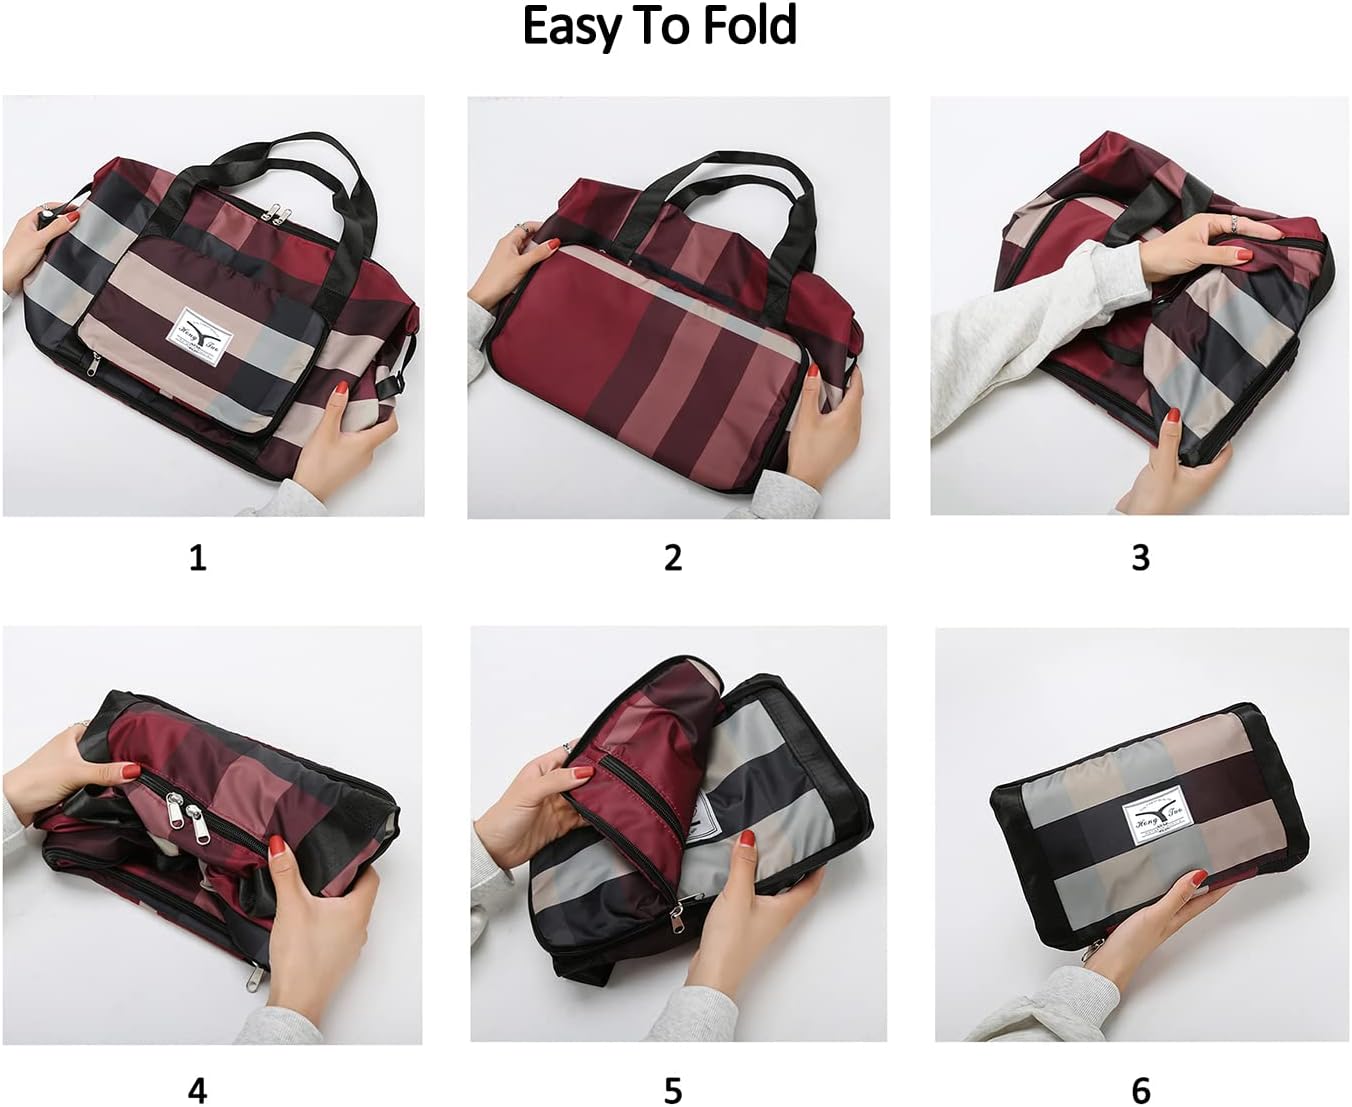 Our bags are well suited to carry all of your personal items. Use it as a